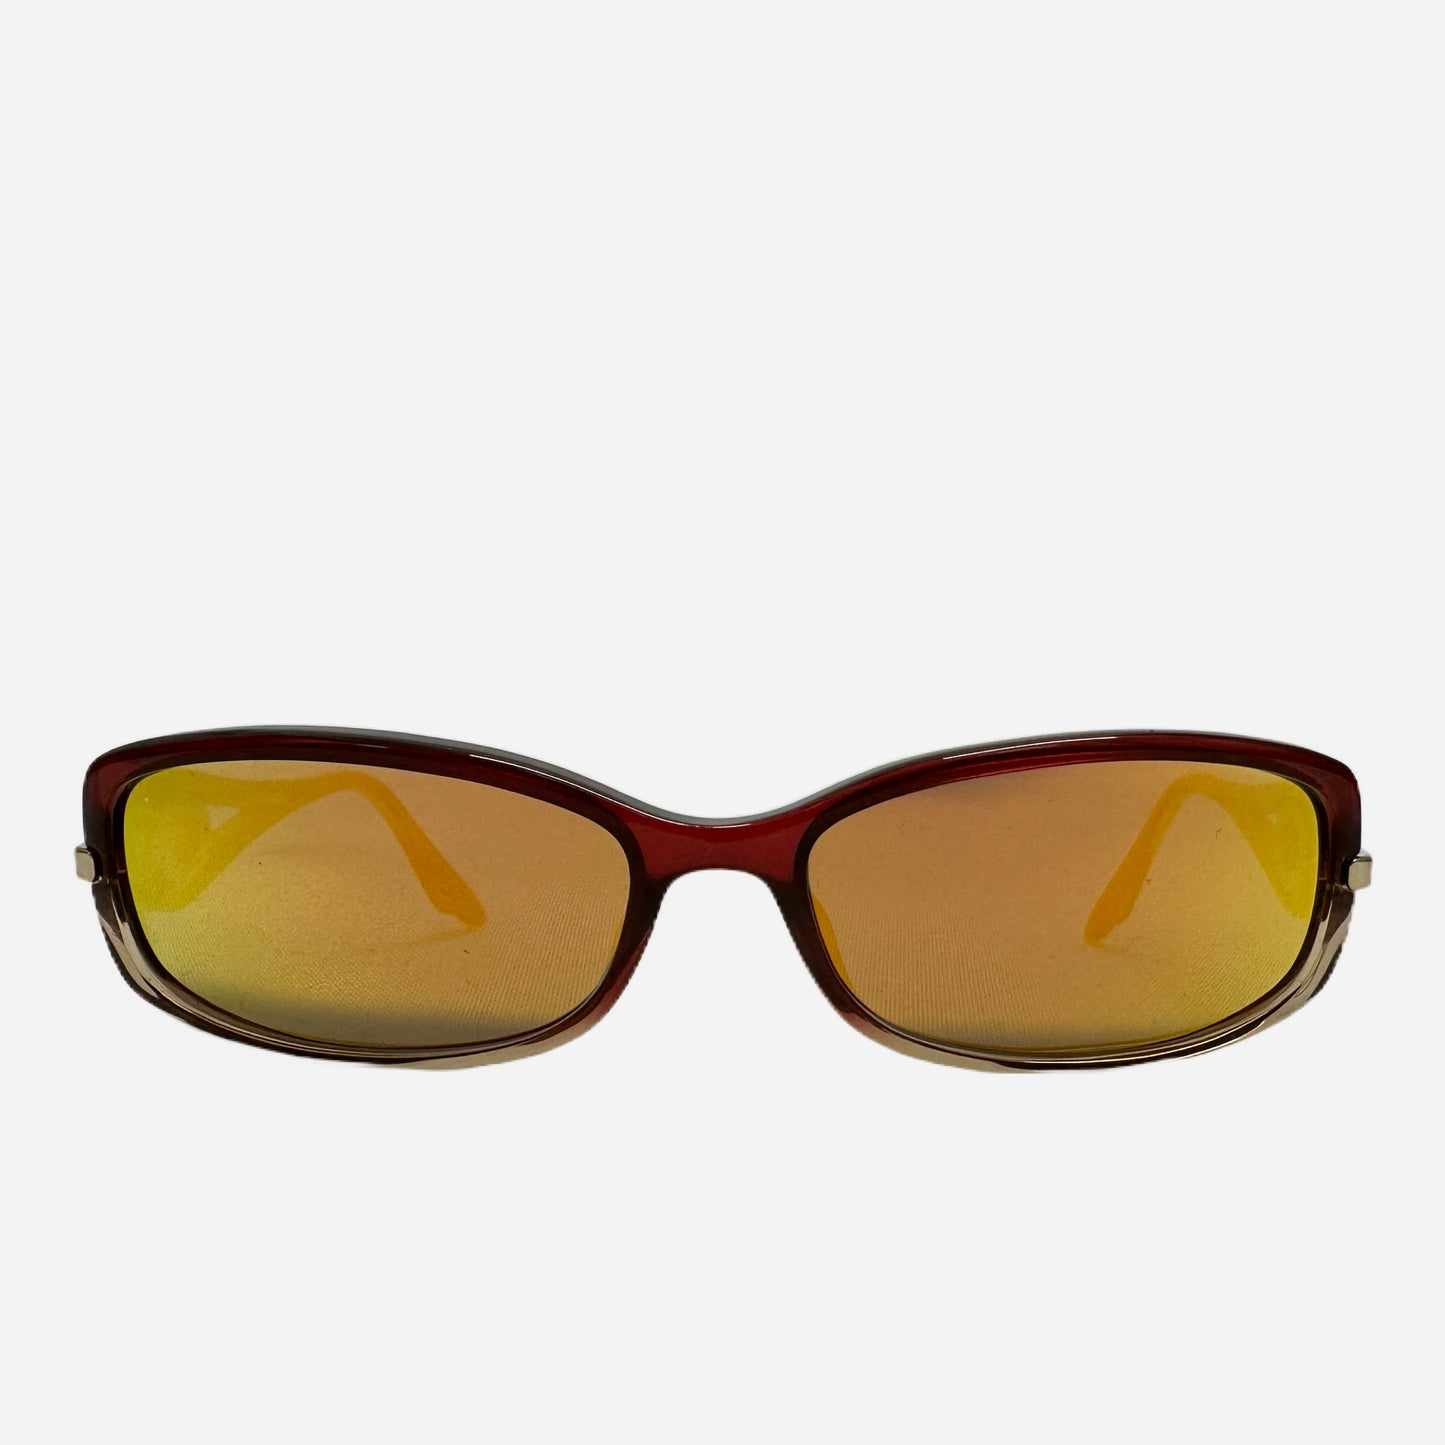 Vintage-Christian-Dior-Sonnenbrille-Sonnenbrille-3216-Optyl-The-Seekers